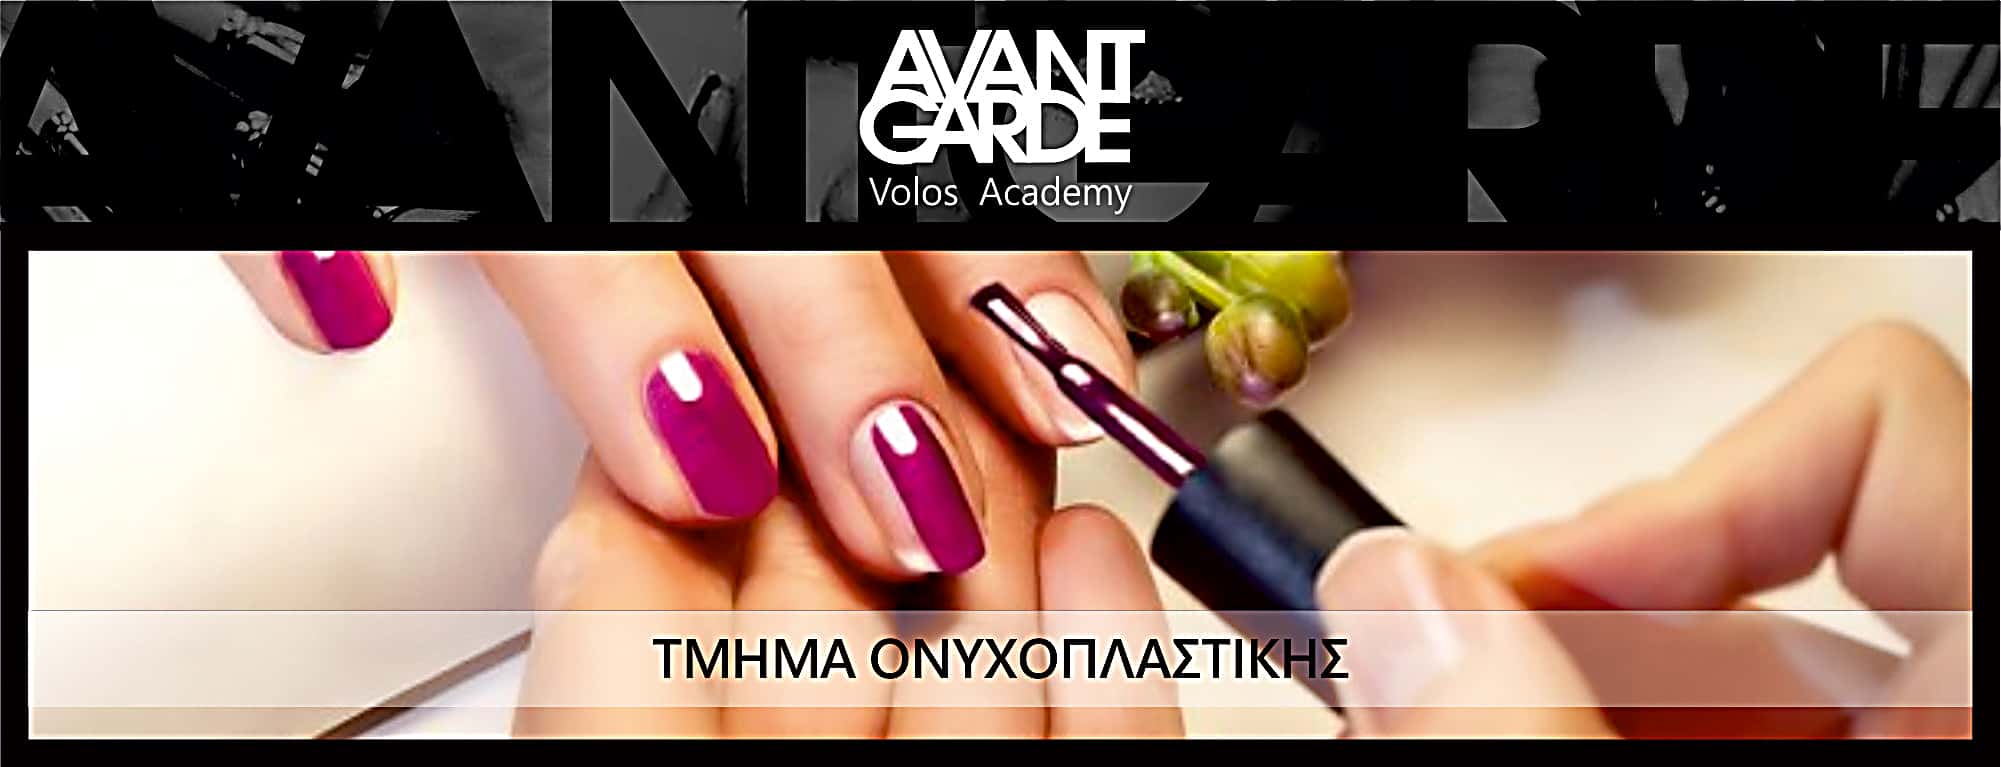 10. "Avant-Garde Nail Art Designs for the Bold and Daring" - wide 3